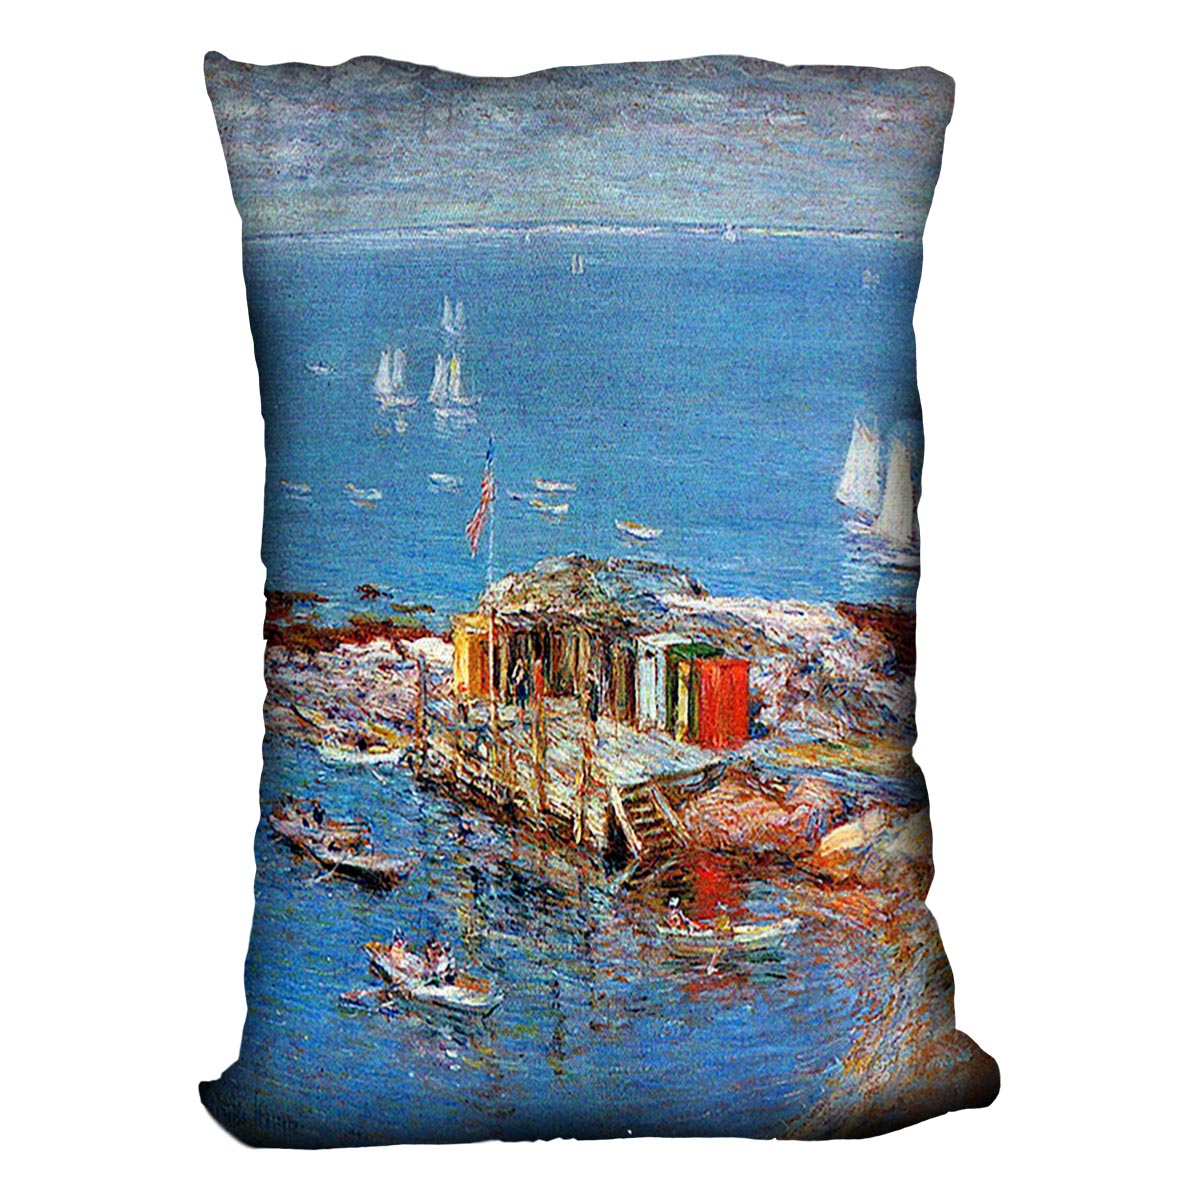 Afternoon in August Appledore by Hassam Cushion - Canvas Art Rocks - 4